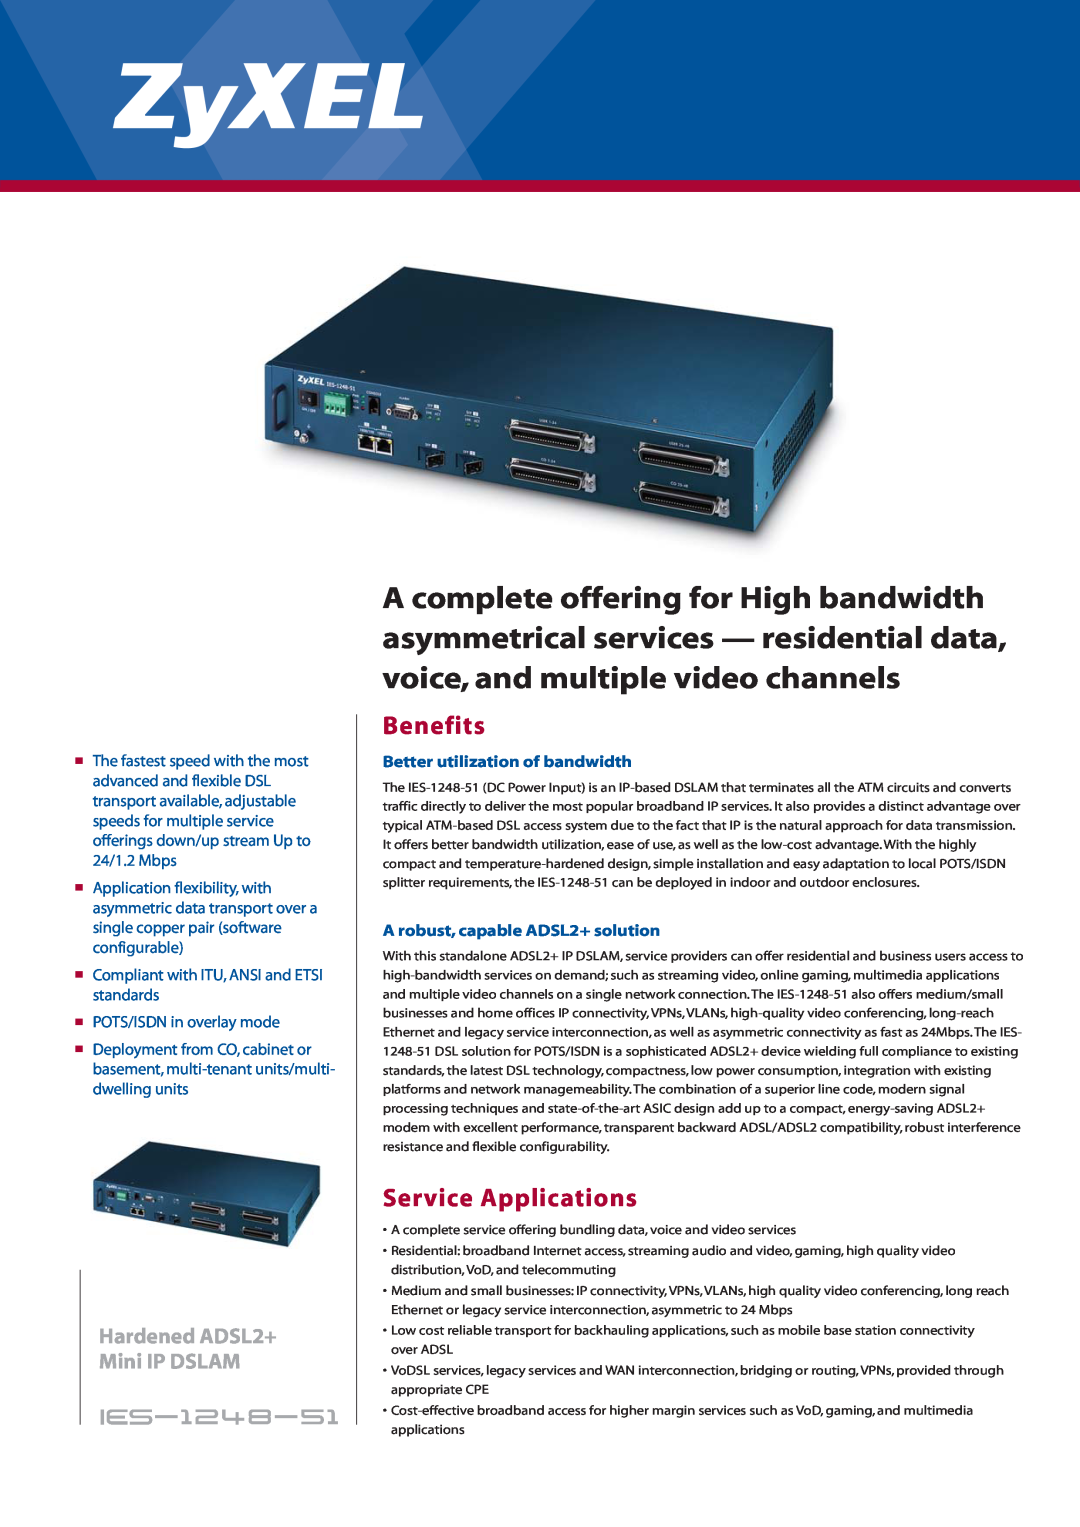 ZyXEL Communications IES-1248-51 manual Benefits, Service Applications, Hardened ADSL2+ Mini IP DSLAM, ies-1248-51 